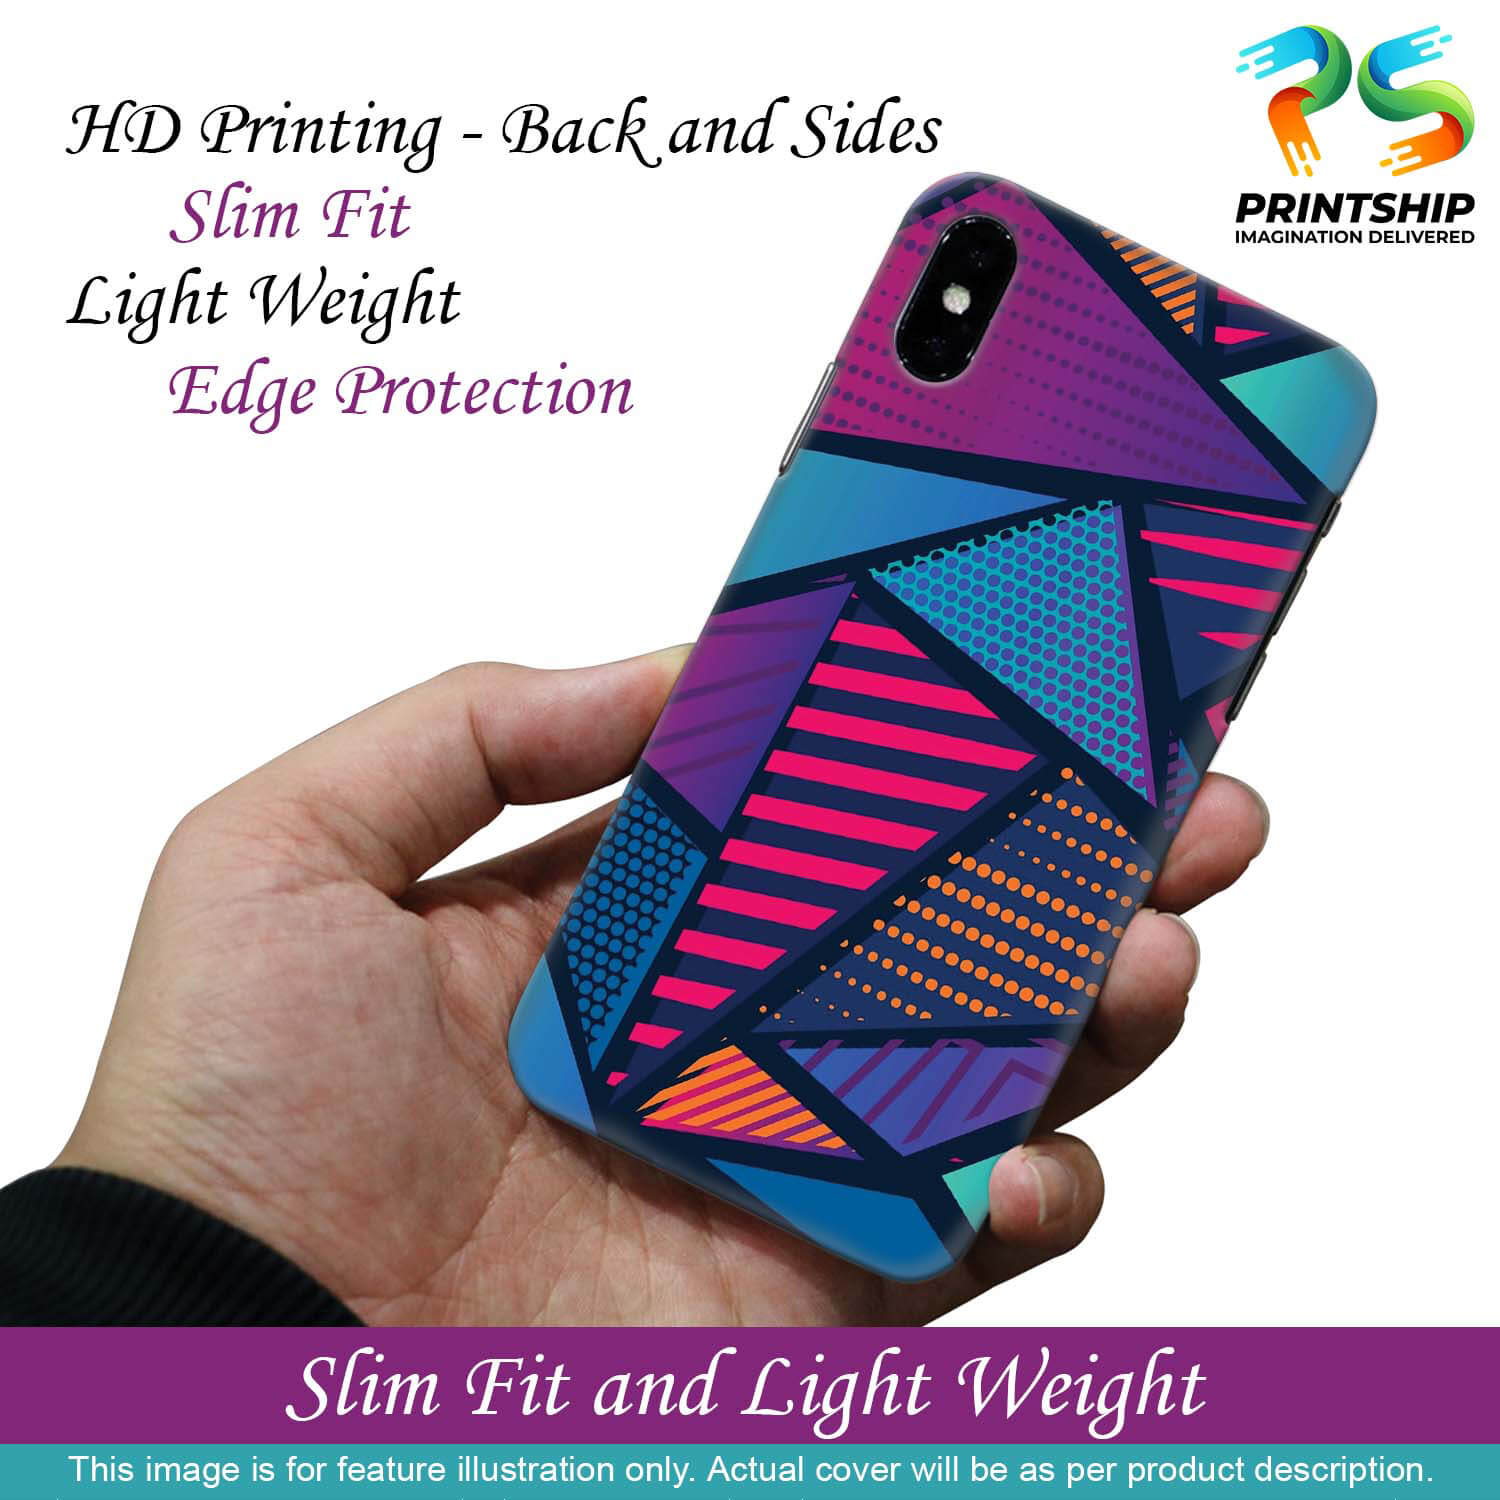 PS1335-Geometric Pattern Back Cover for Apple iPhone X